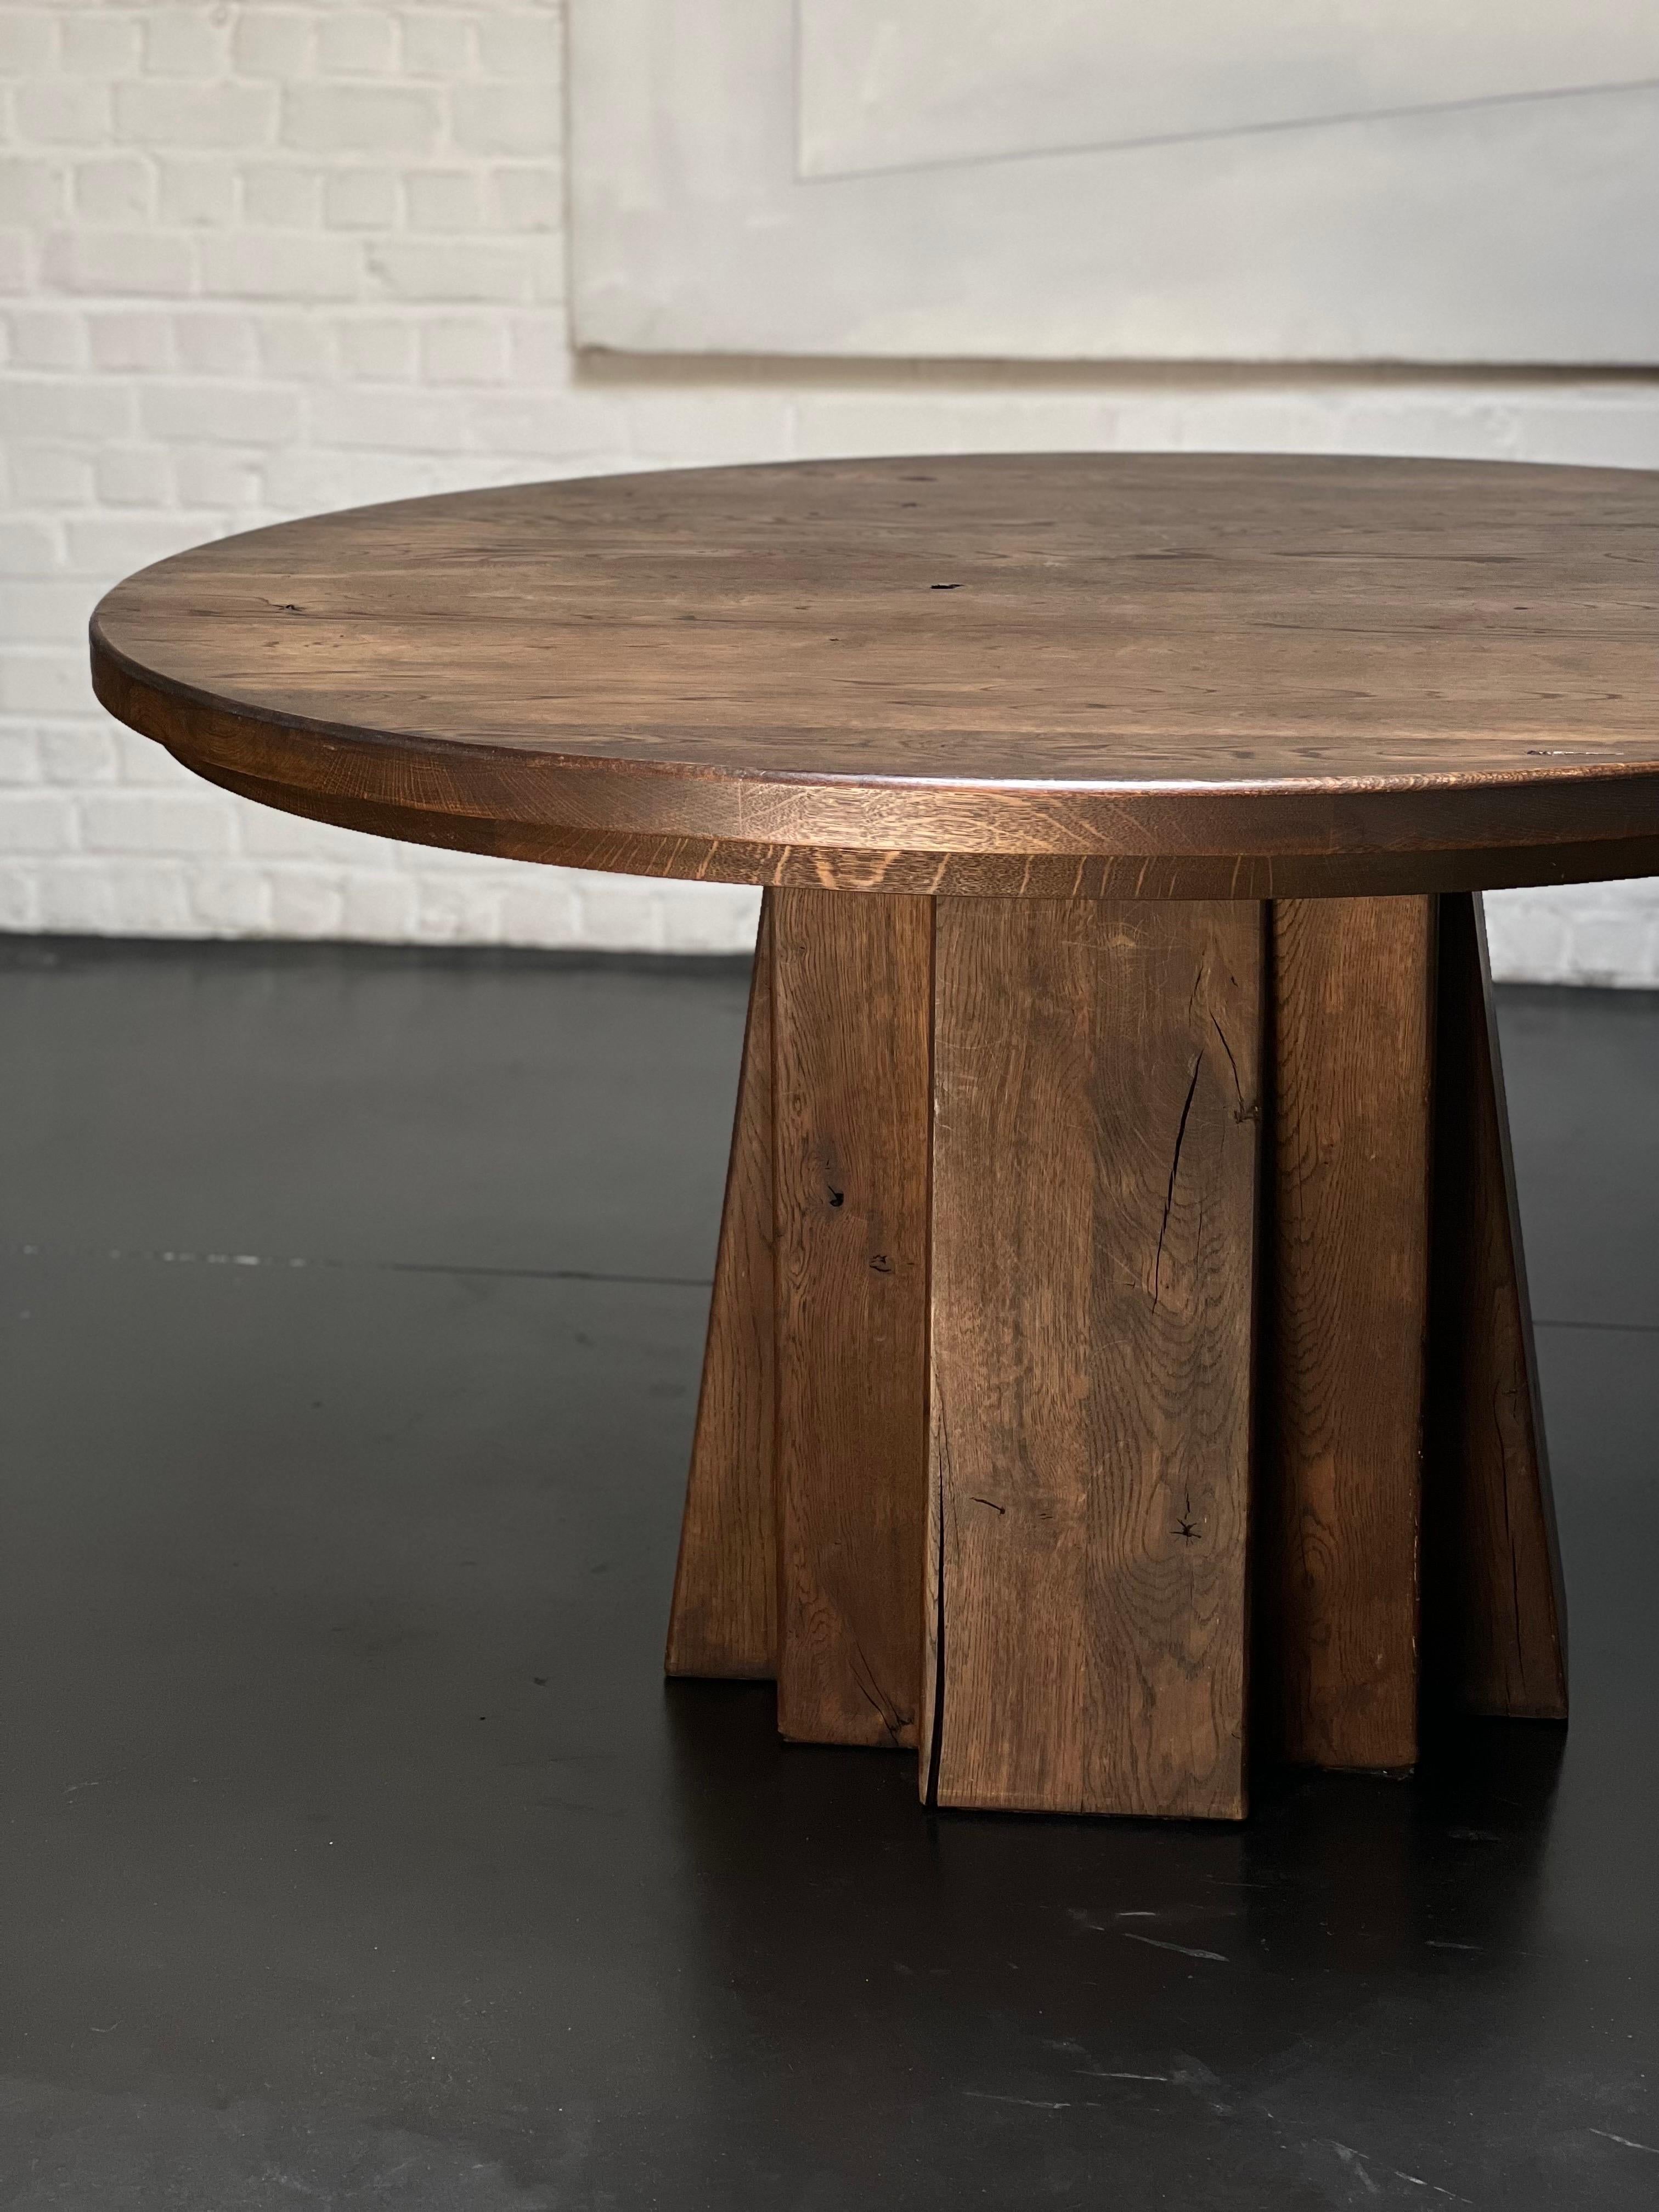 Very unique stained massive handmade oak dining table. The top is 140 cm in diameter and the height is 77 cm.  The top is lightly patinated and shows various shades of brown/brownish colors Elegant and brutalist describe that table properly. Very